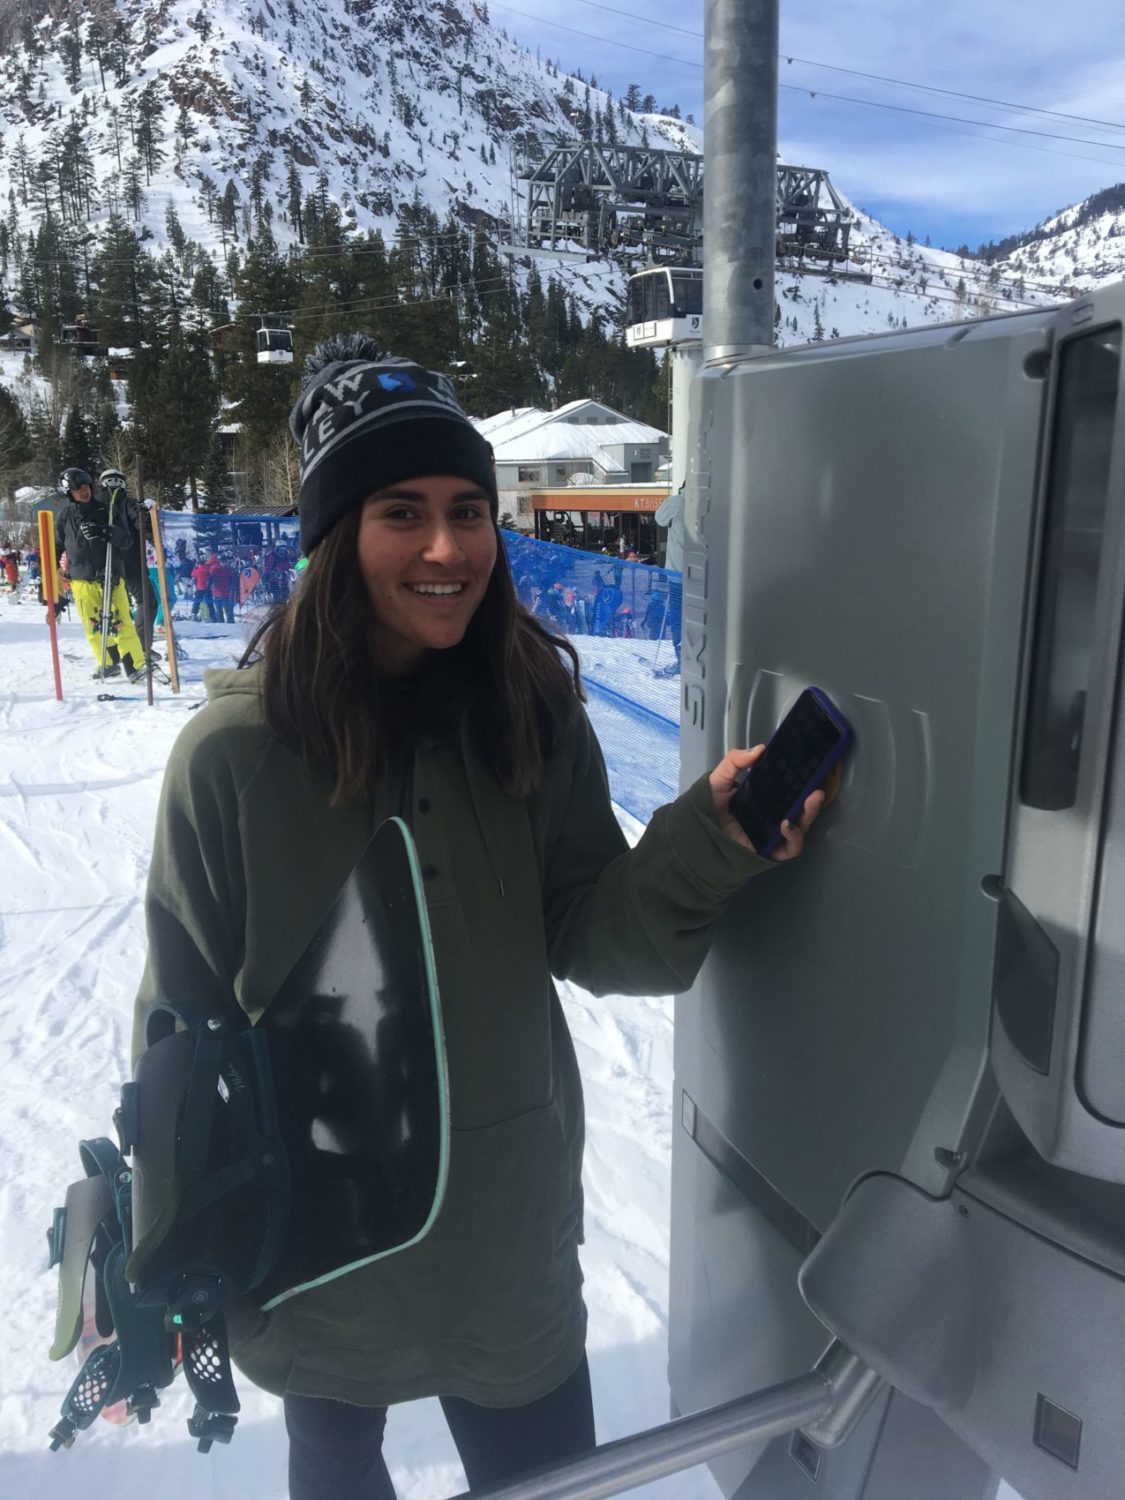 Ticket Checking, Mobile Ticket Checking, Checking tickets with mobile, cellphone, gate activated with cell phone, cell phone rfid ski resort, ski resort cell phone tickets